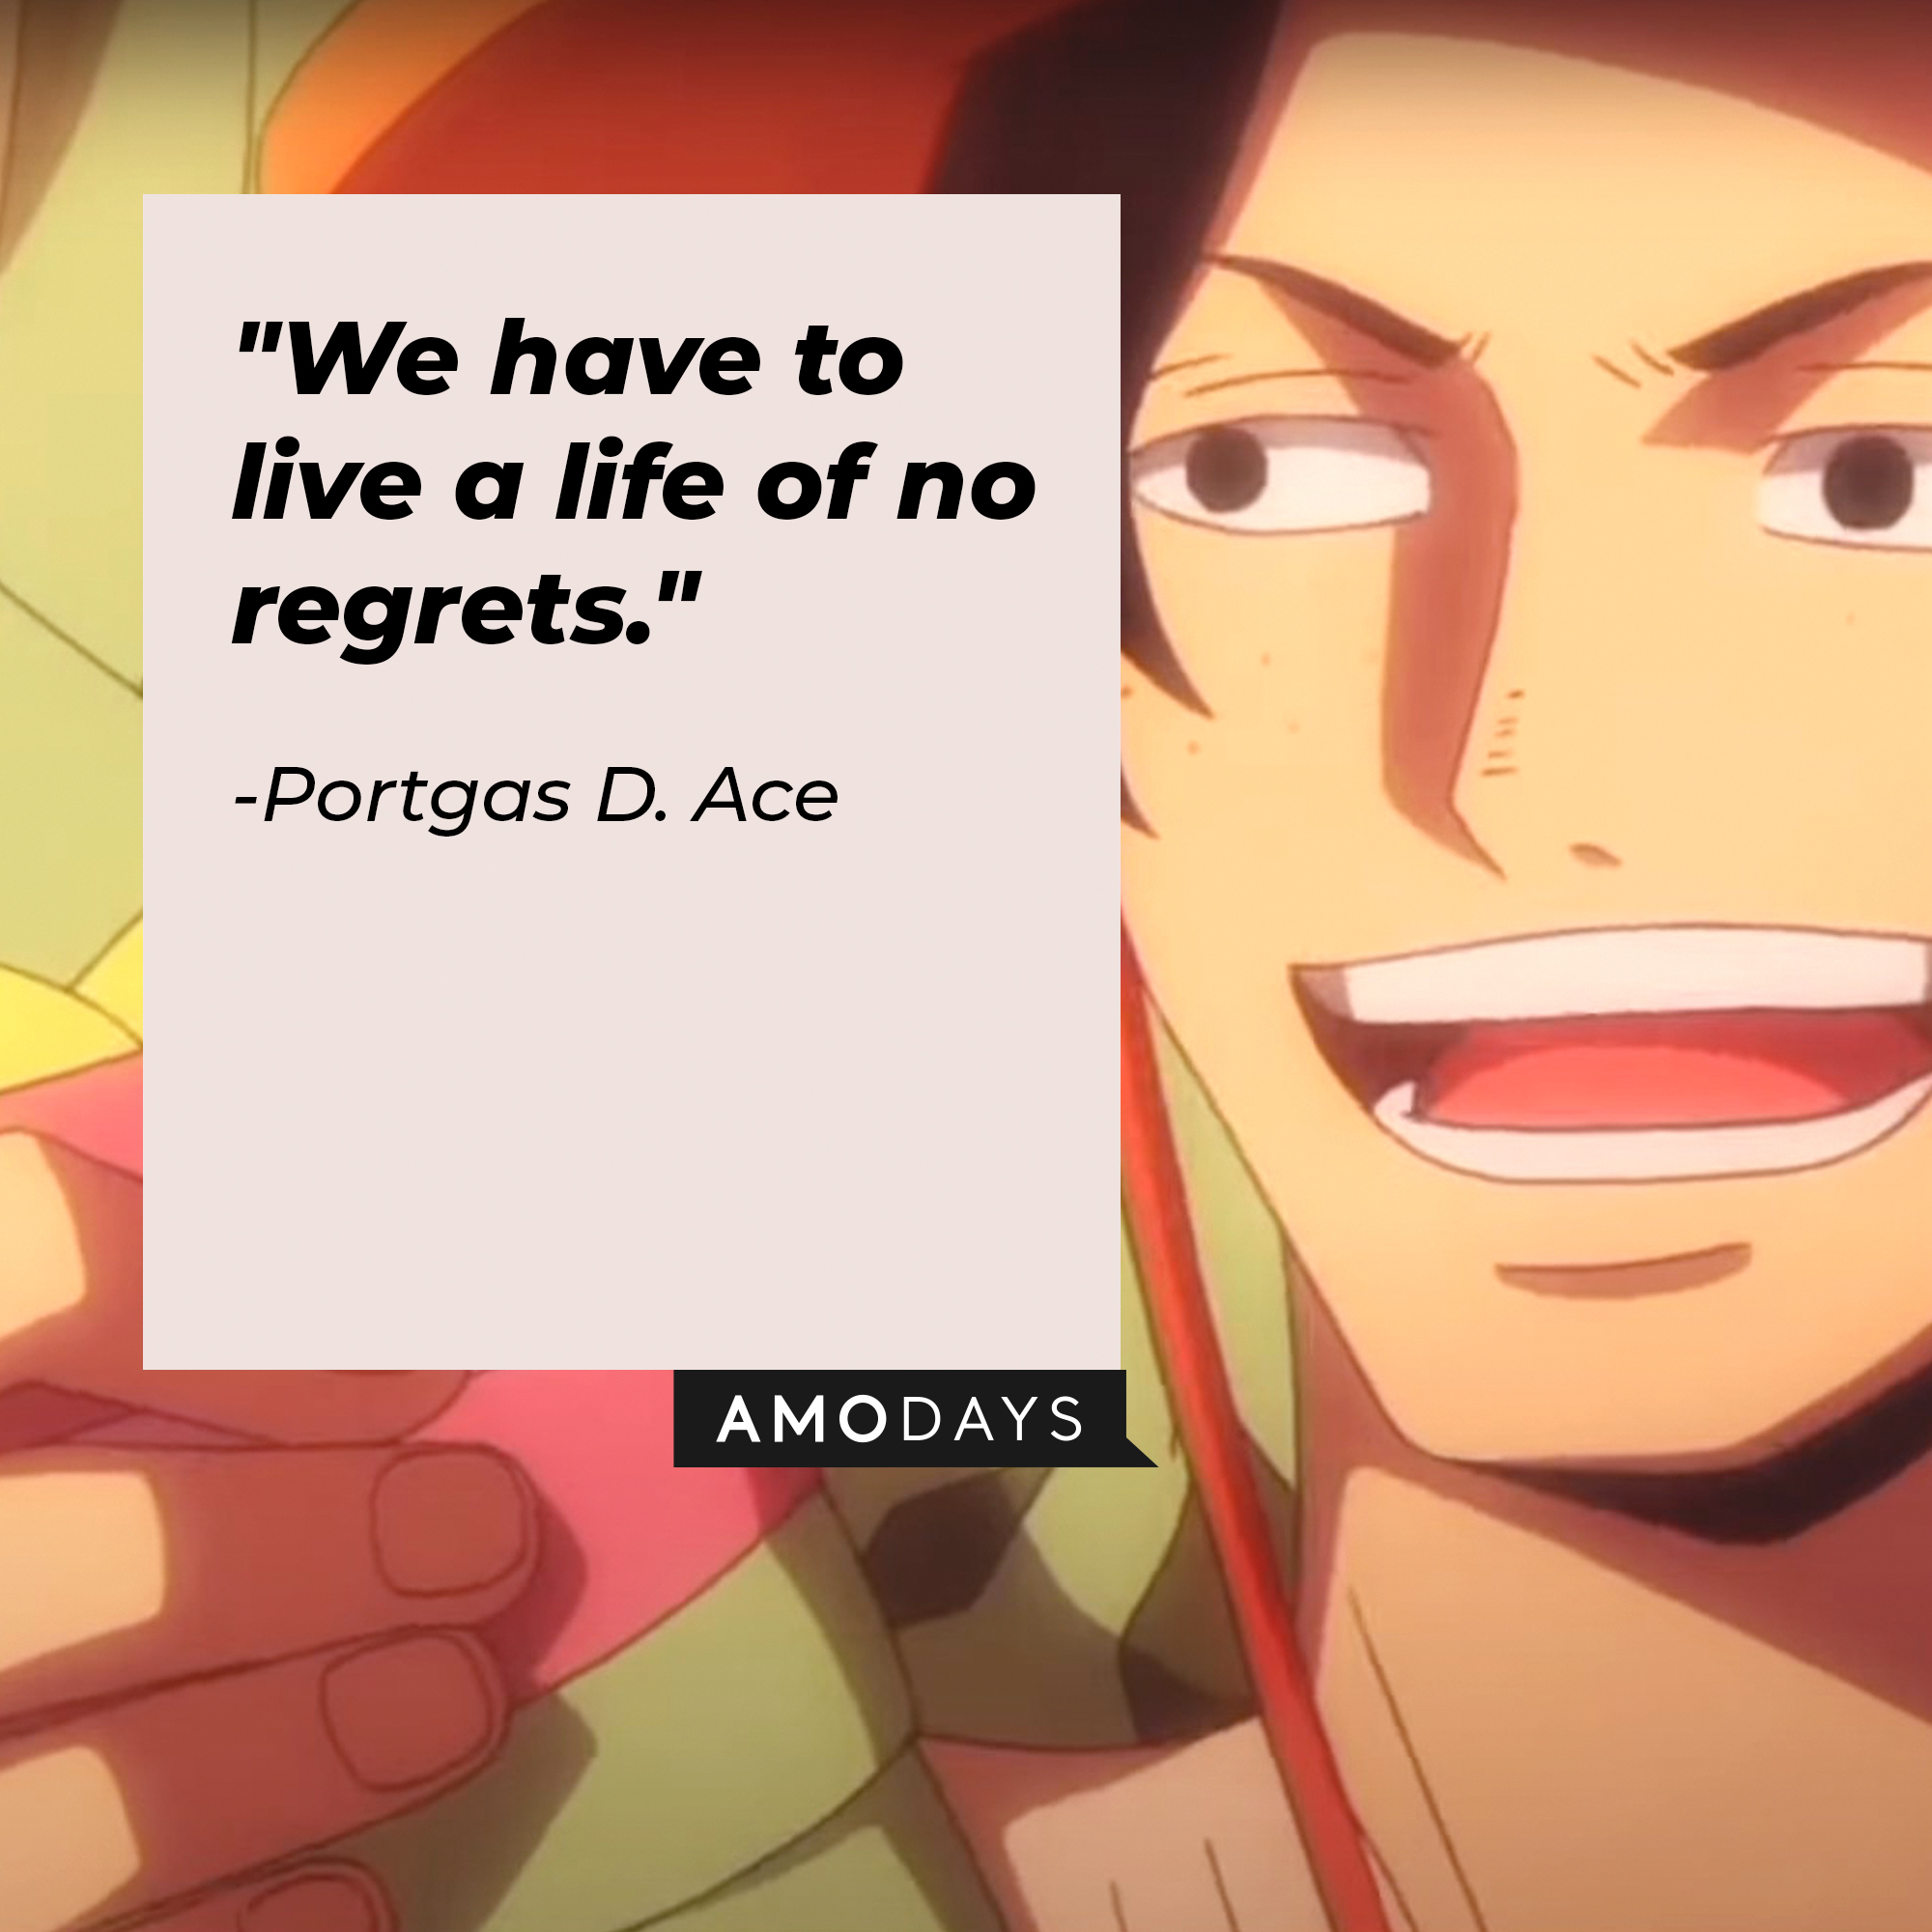 Portgas D. Ace’s quote: "We have to live a life of no regrets." | Source: facebook.com/onepieceofficial